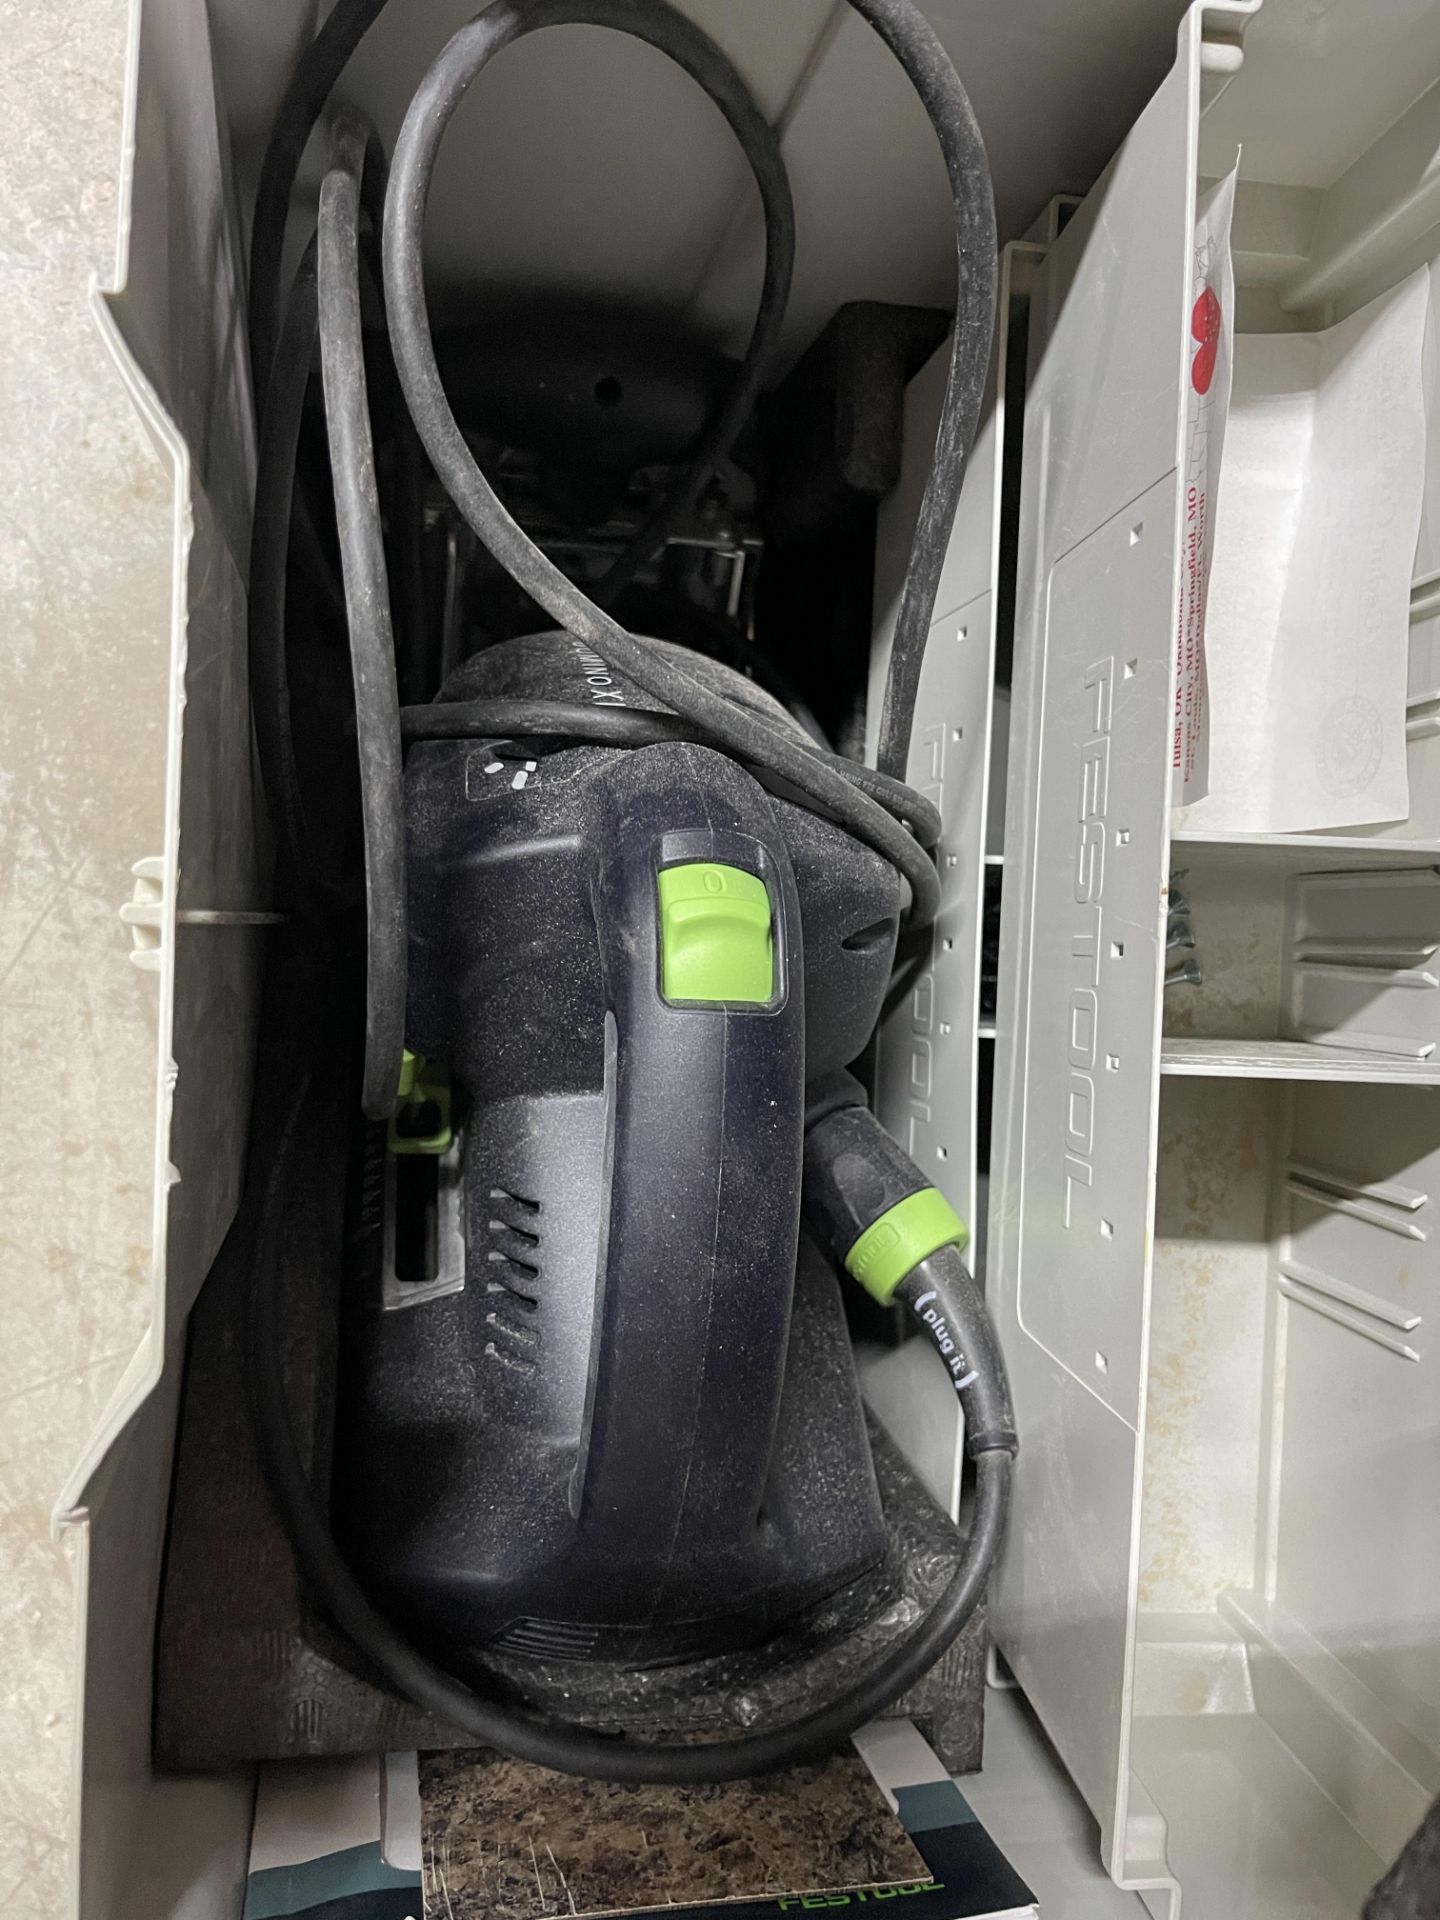 Festool Domino XL DF700 EQ Made in Germany - Image 3 of 3